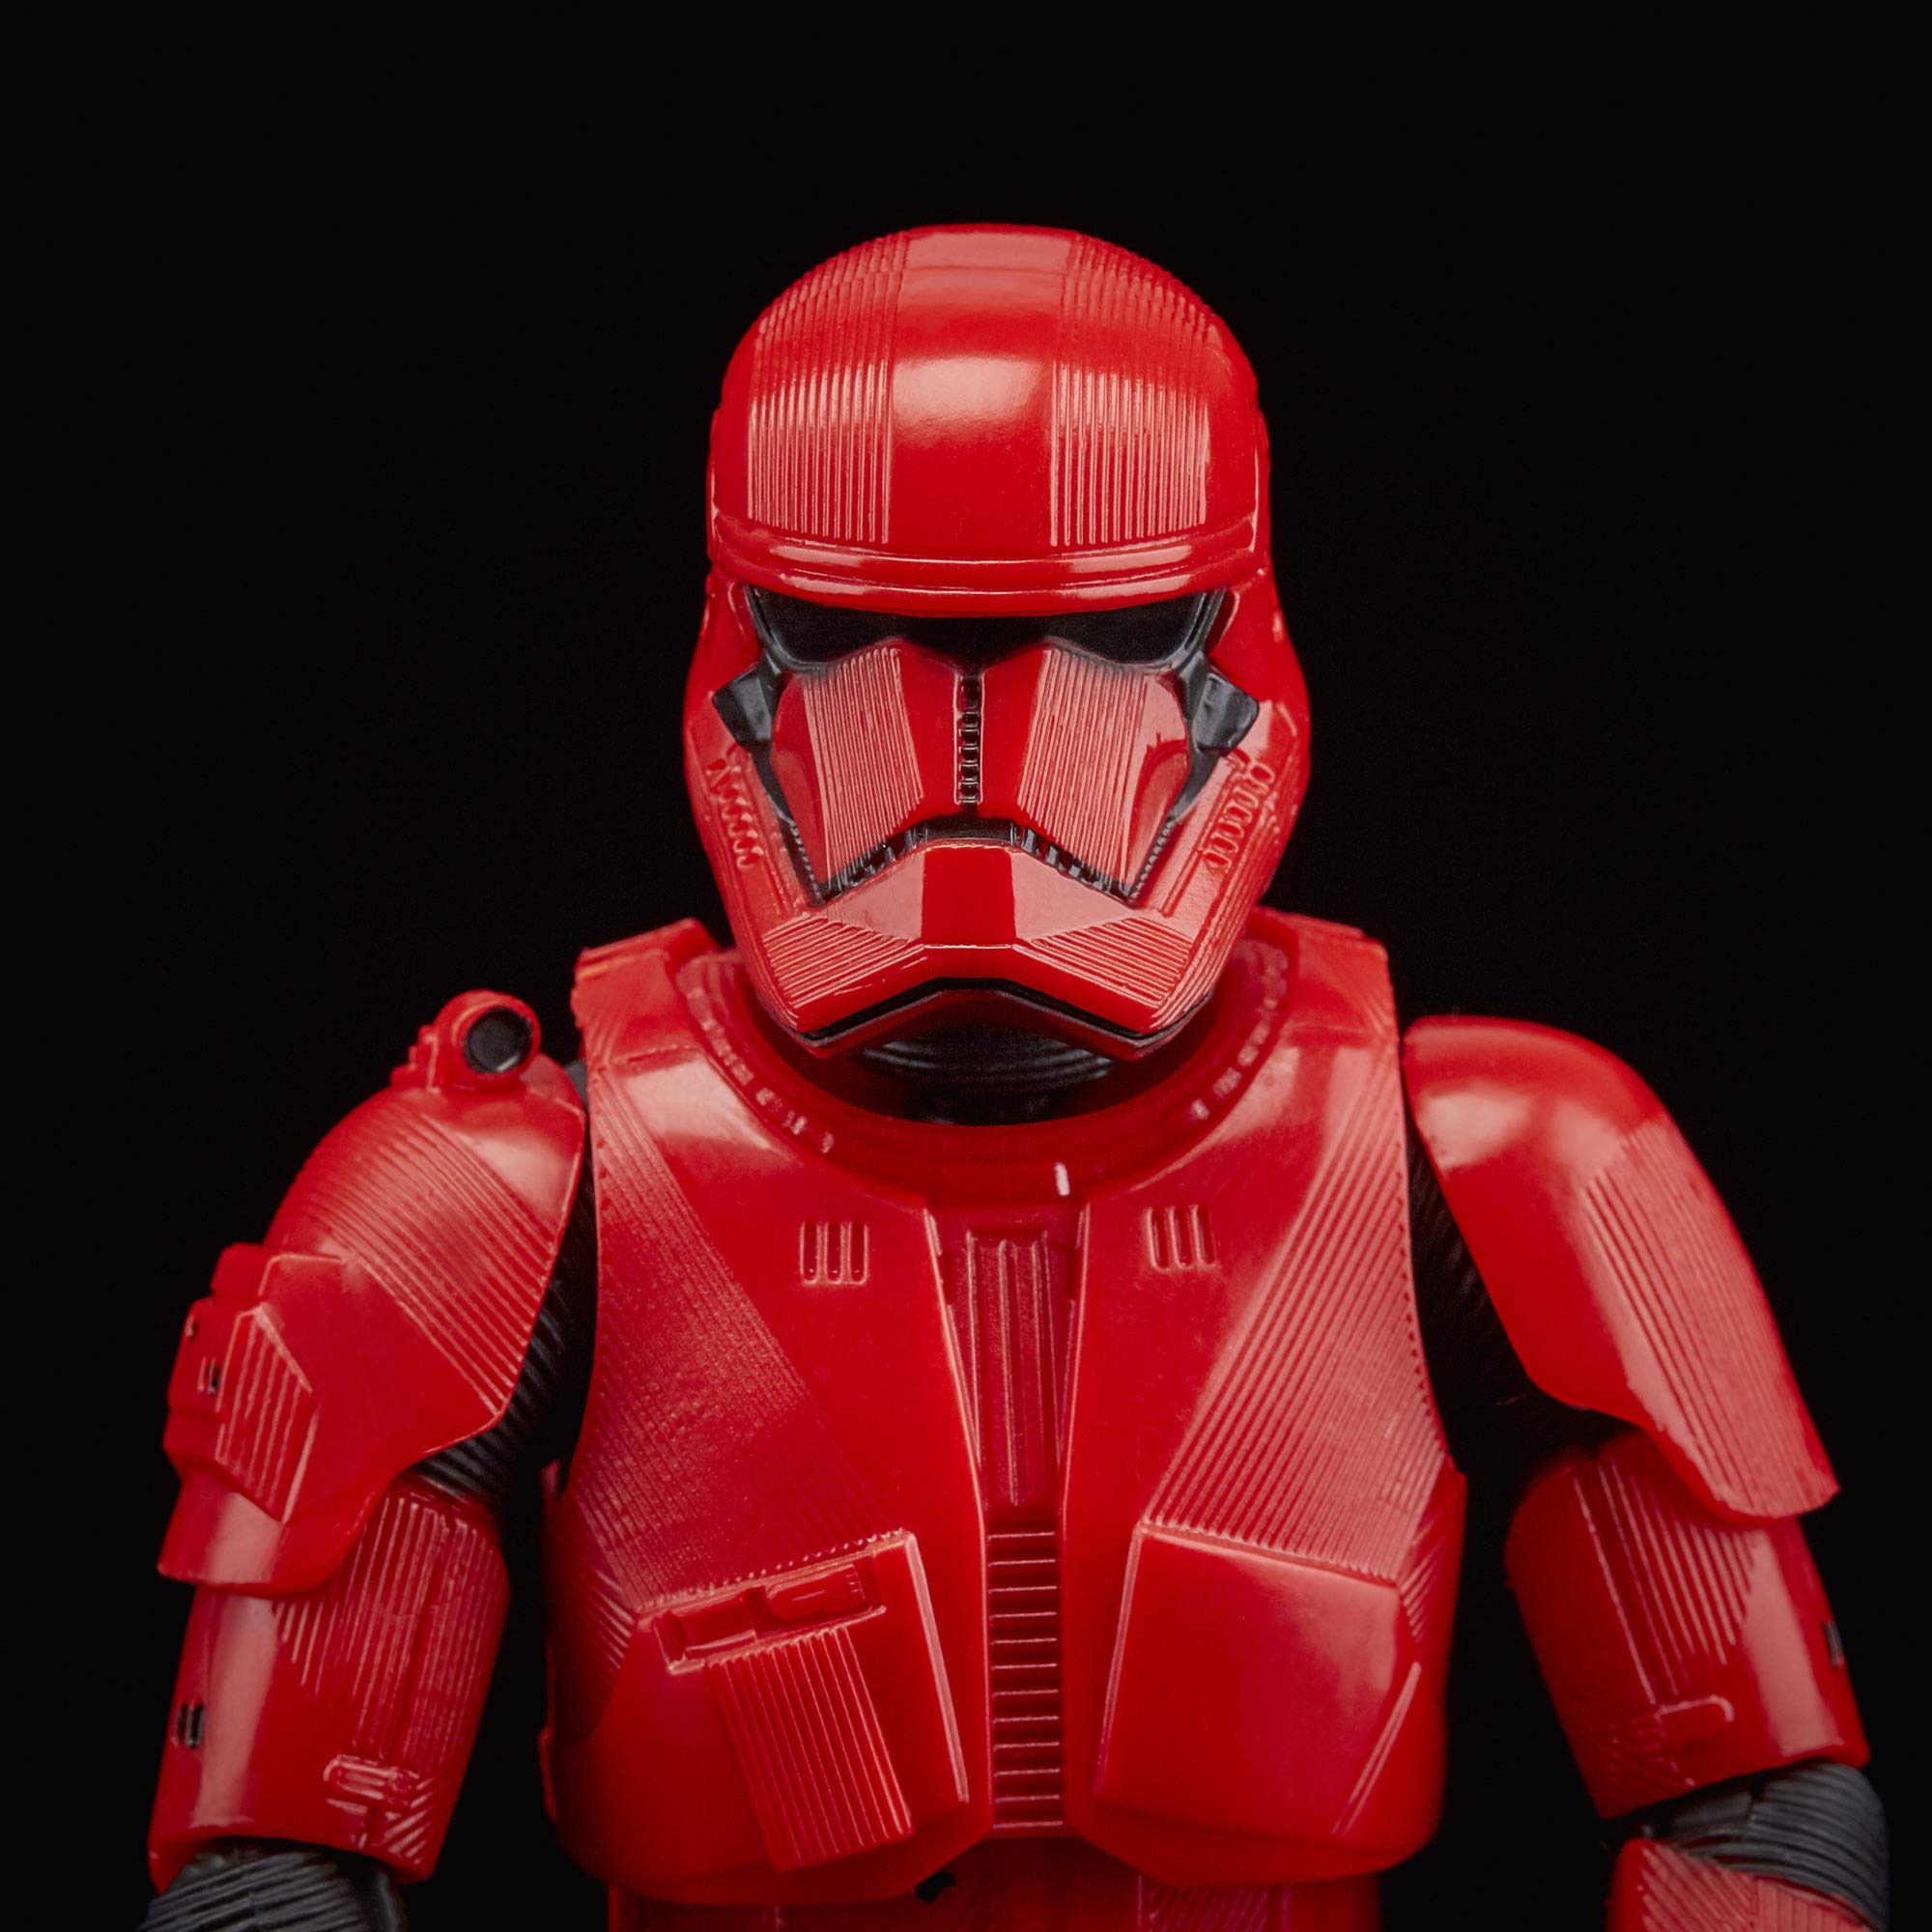 STAR WARS The Black Series Sith Trooper Toy 6